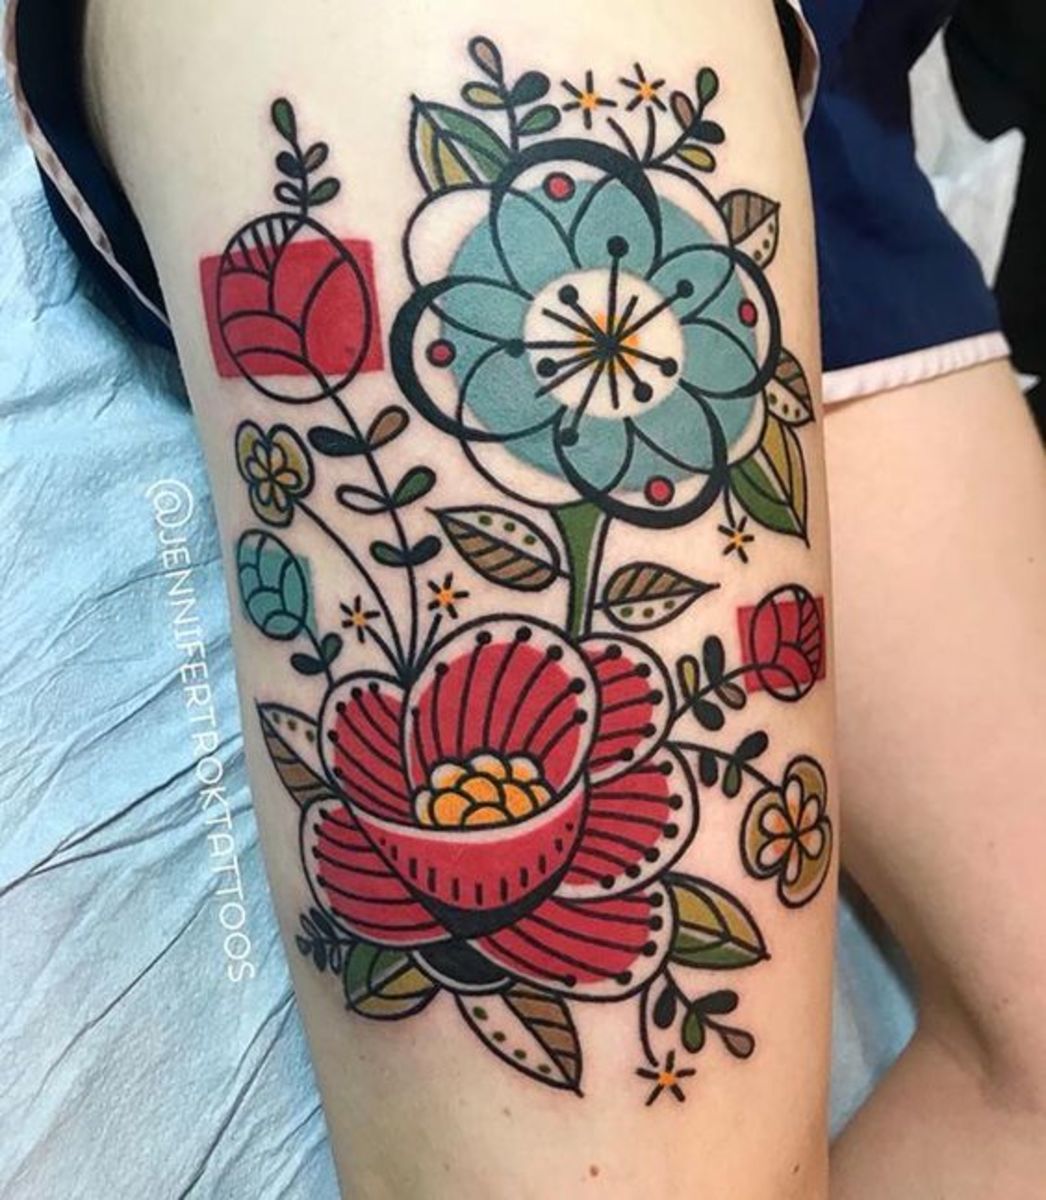 The colors make a bold statement in this tatoo.